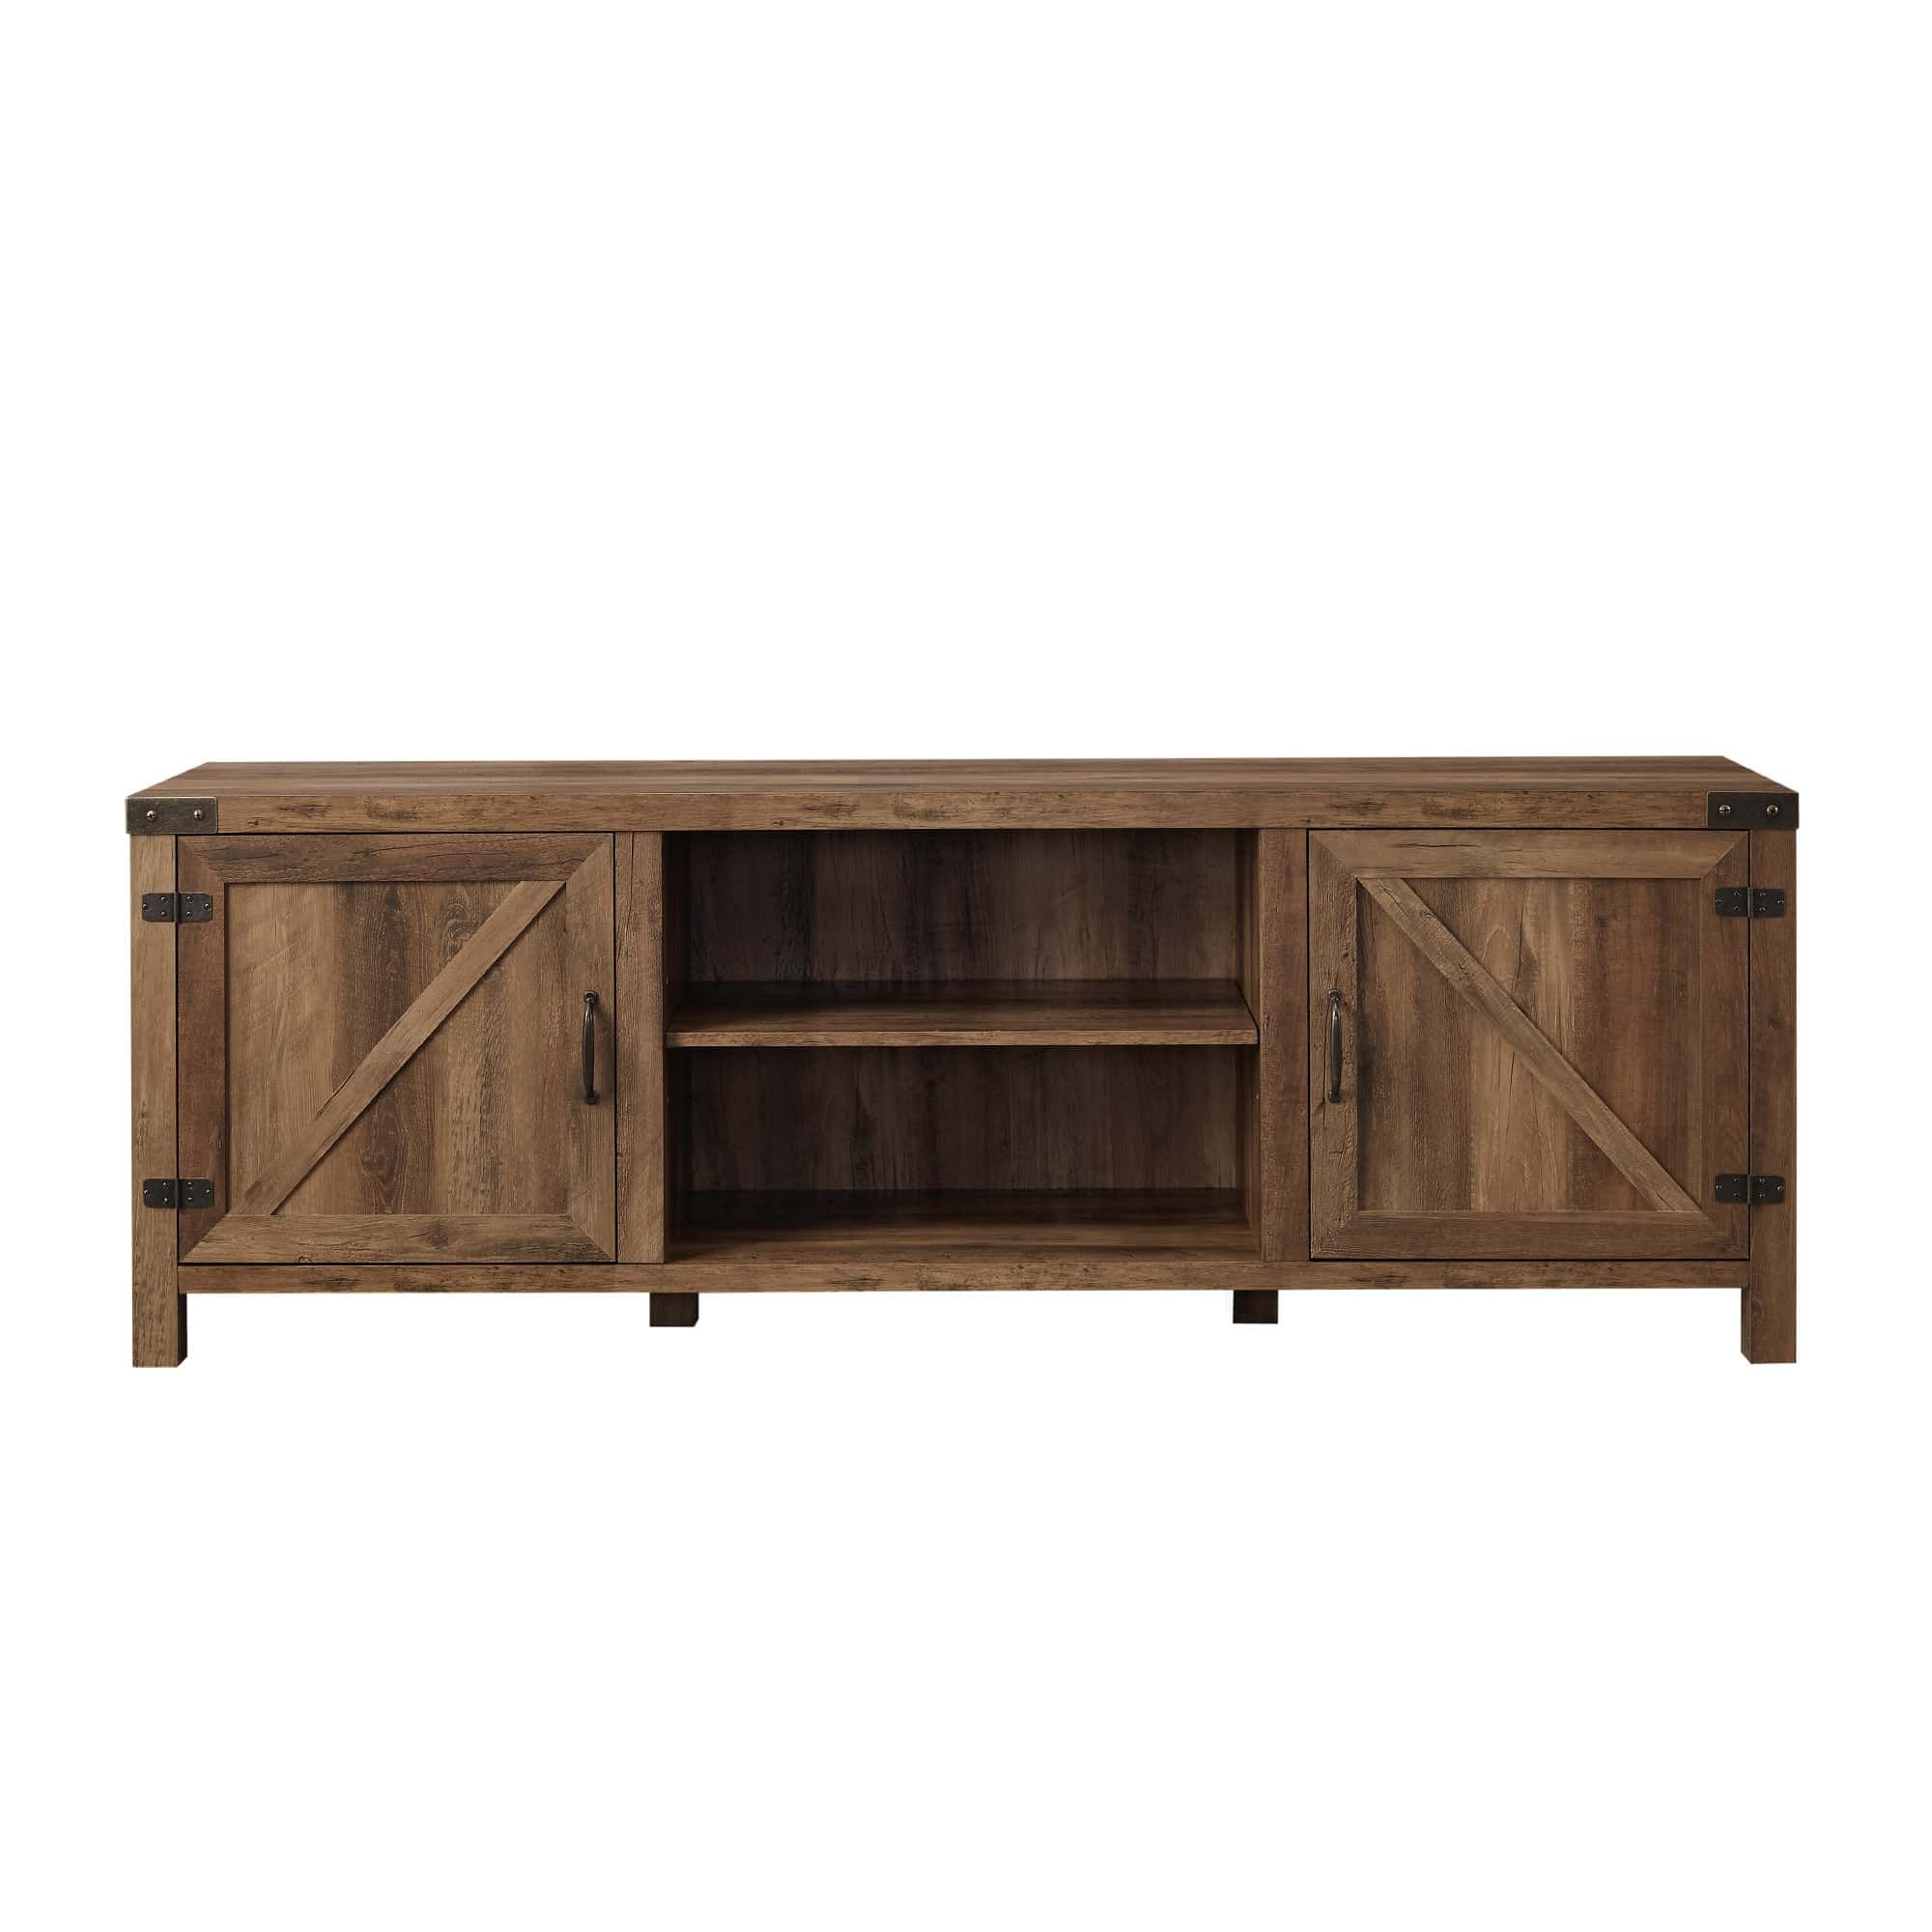 Recent Farmhouse Tv Stands For 70 Inch Tv In 70 Inch Modern Farmhouse Tv Stand – Rustic Oakwalker Edison (View 14 of 15)